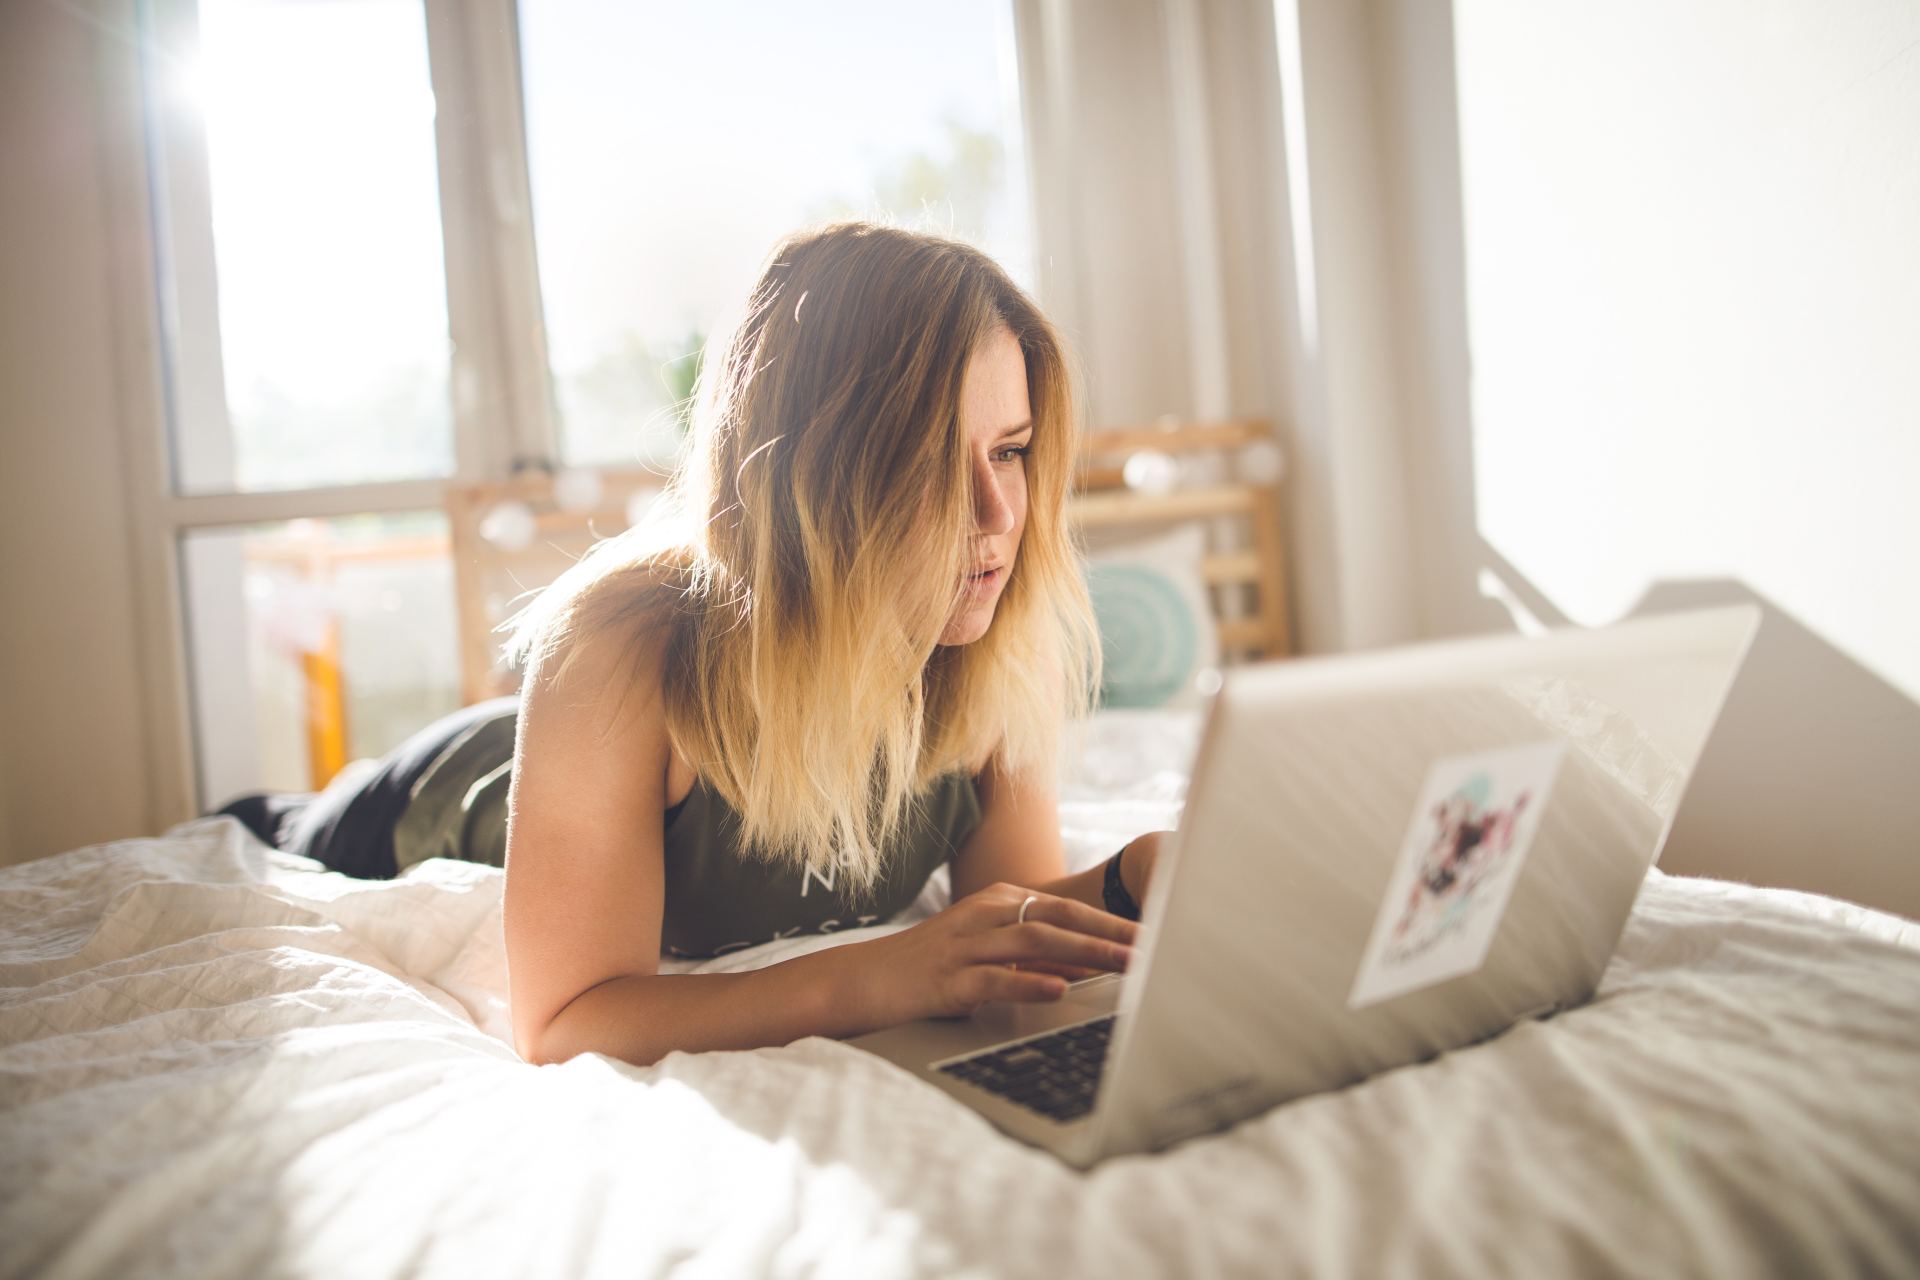 girl with straight blond hair and green singlet, laying on white bed looking at laptop